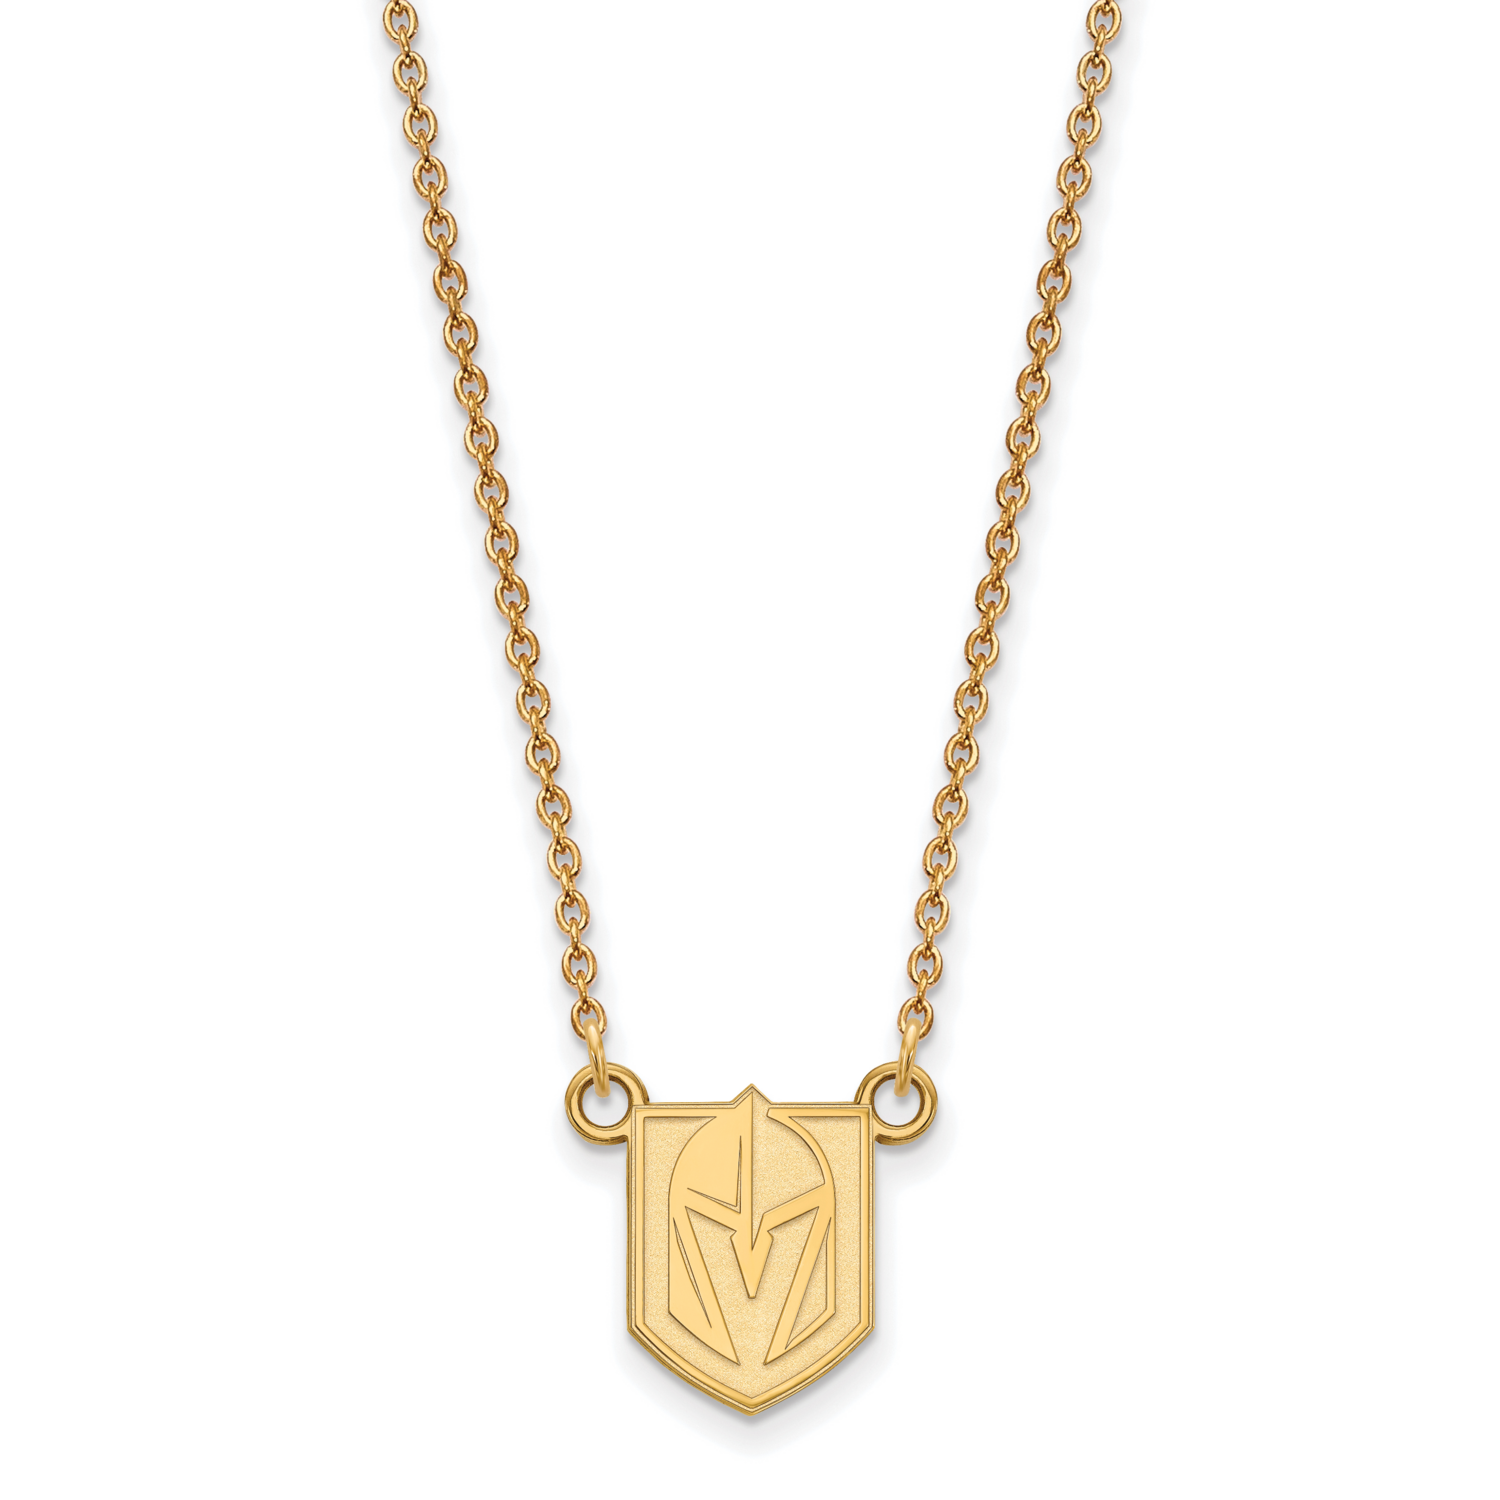 Vegas Golden Knights Small Pendant Necklace Gold-Plated on Sterling Silver GP007VGK-18